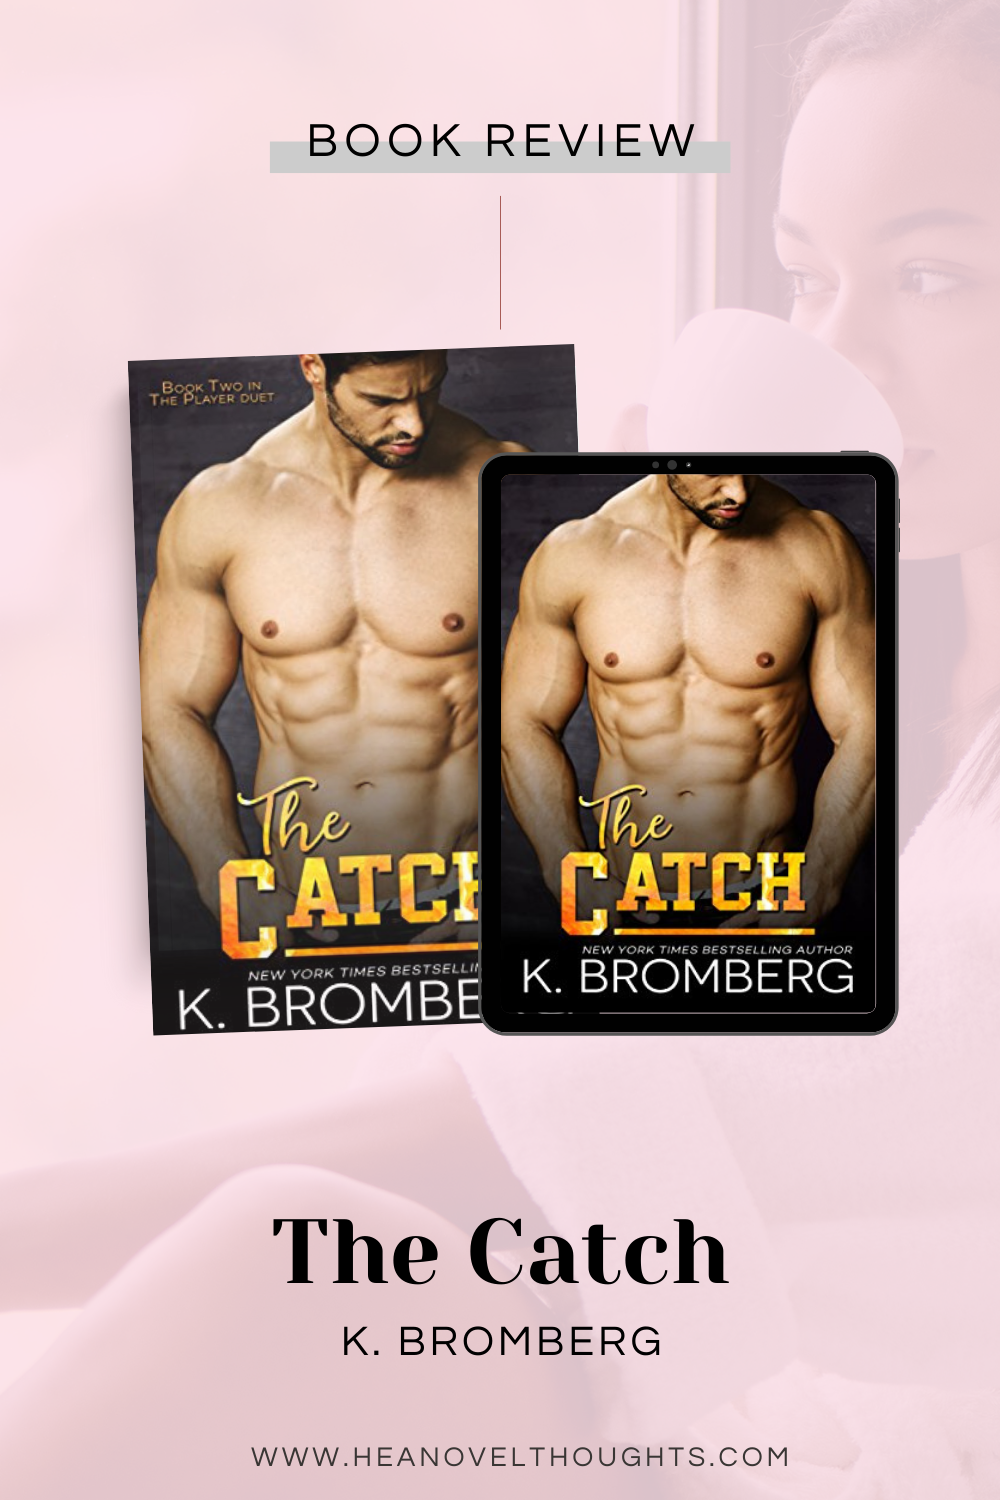 The Catch by K. Bromberg